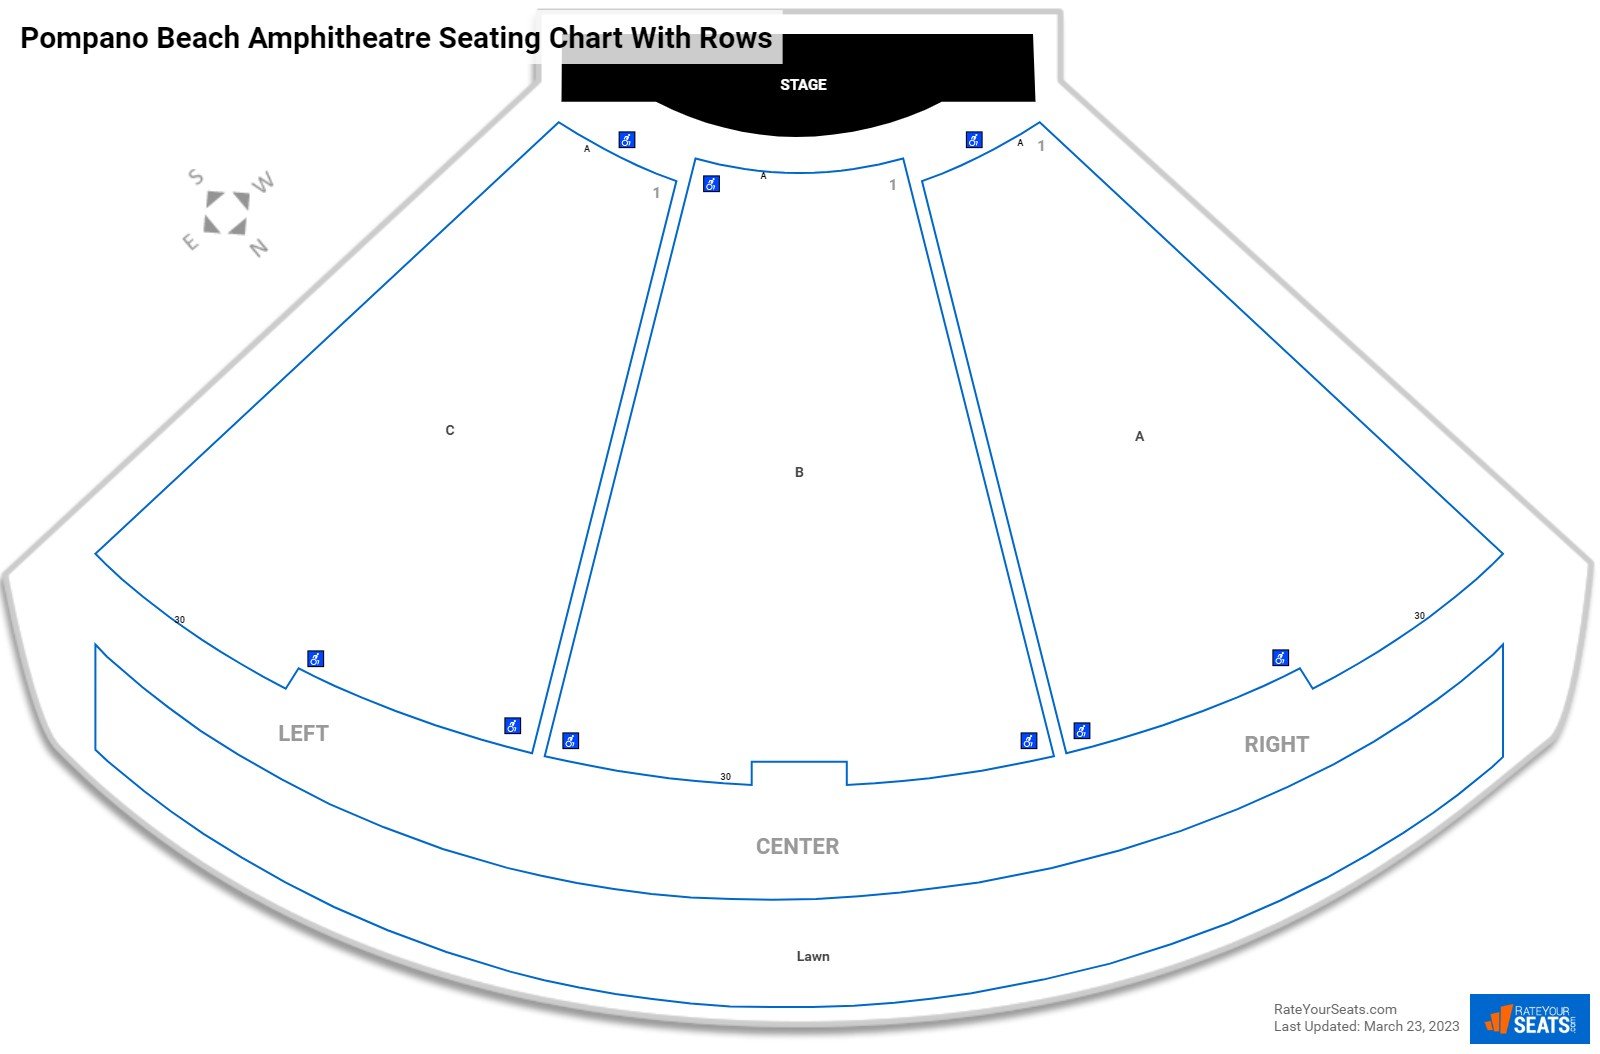 Pompano Beach Amphitheatre seating chart with row numbers